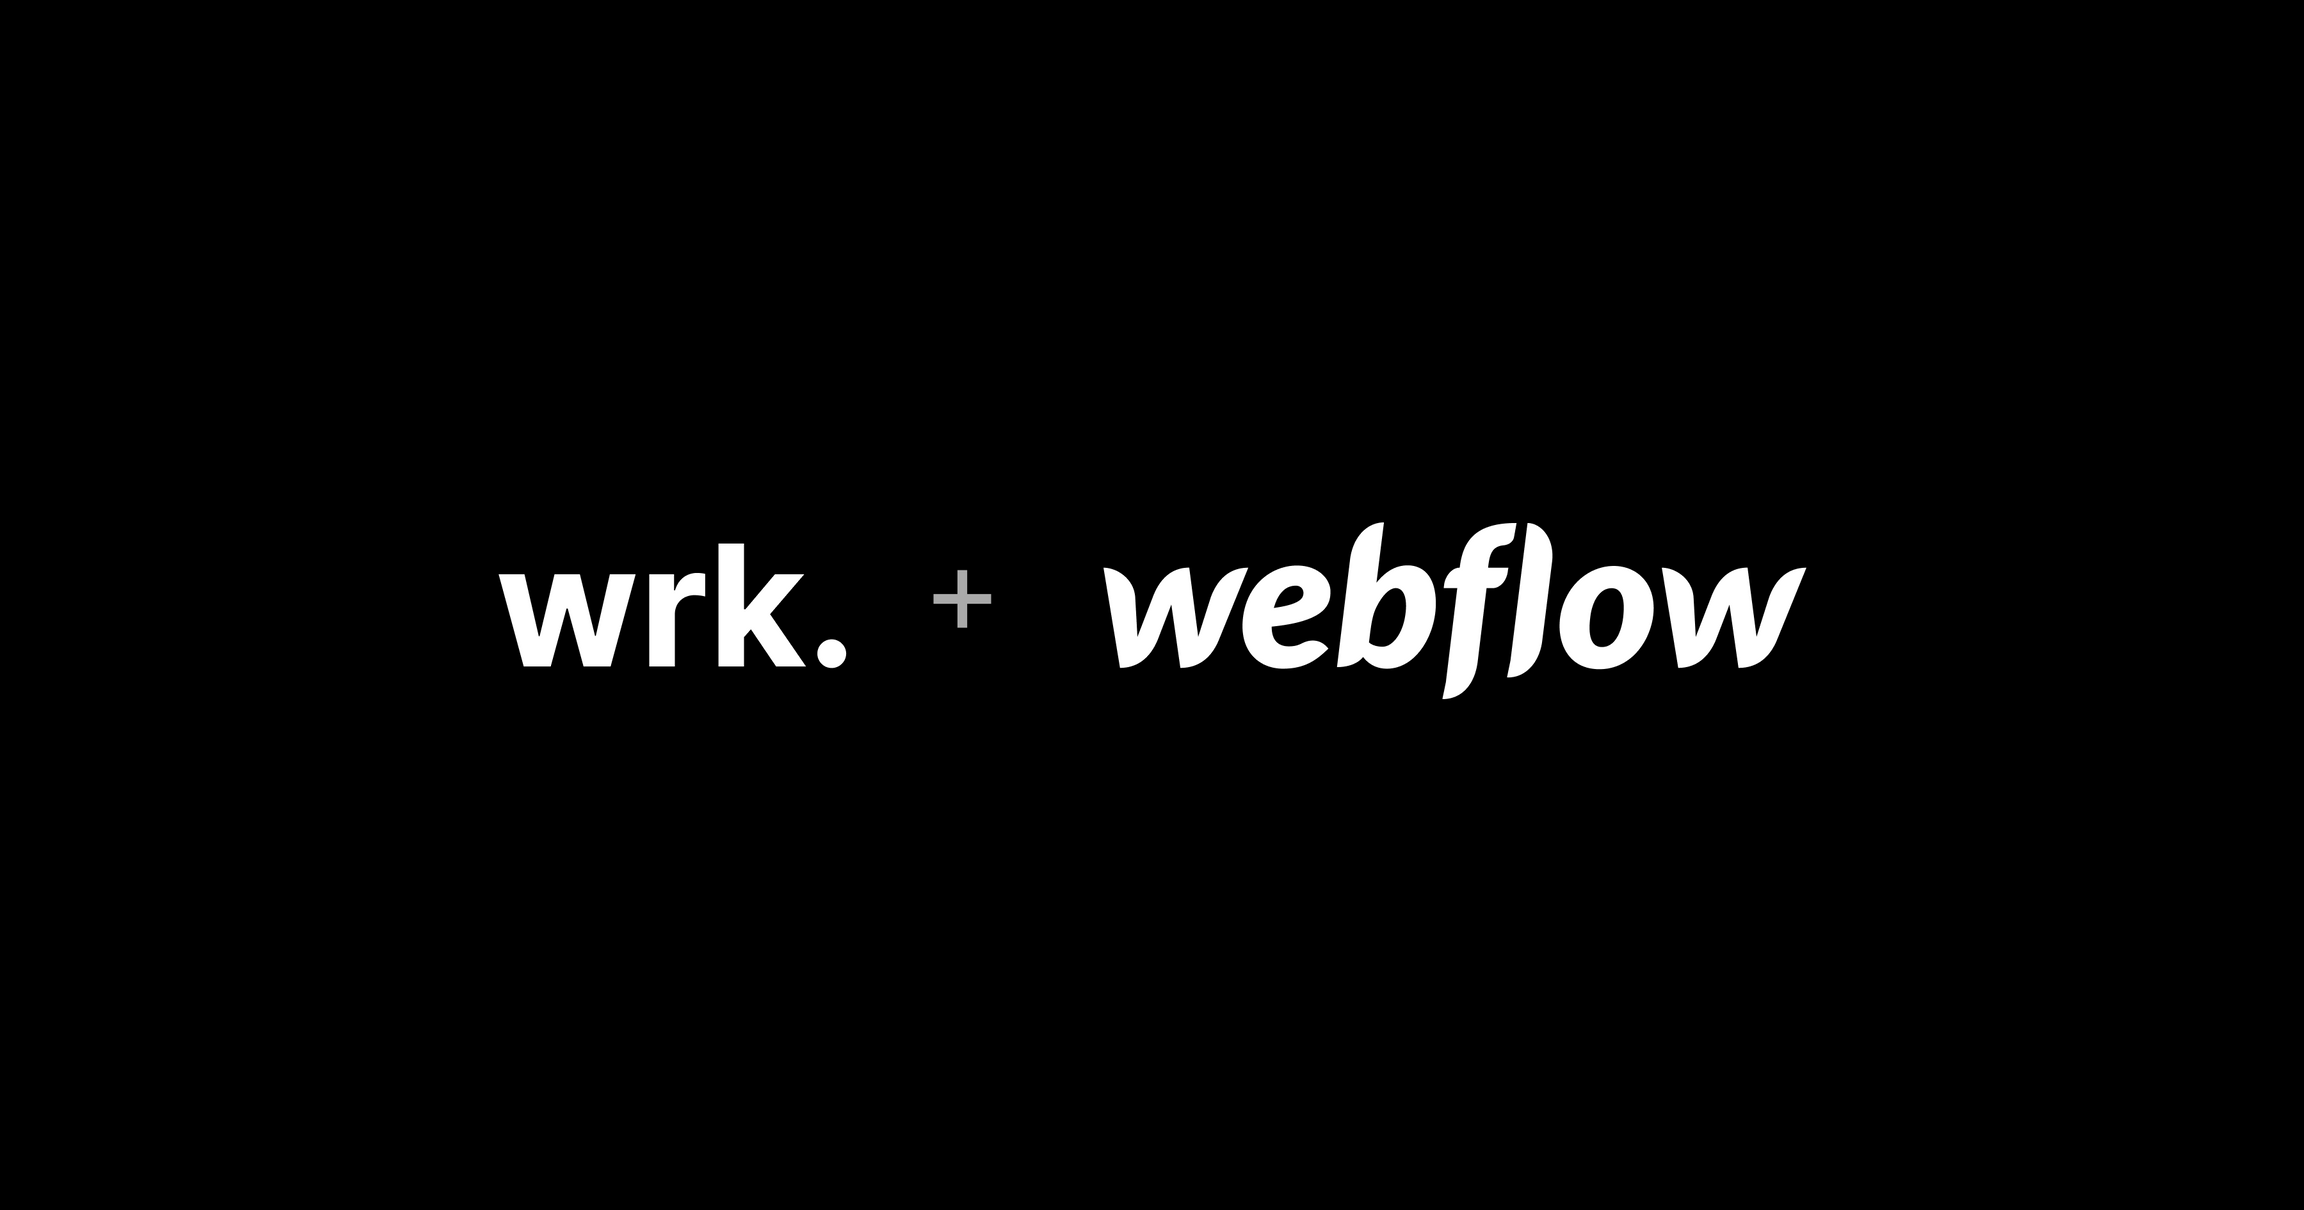 The Wrk and Webflow logos